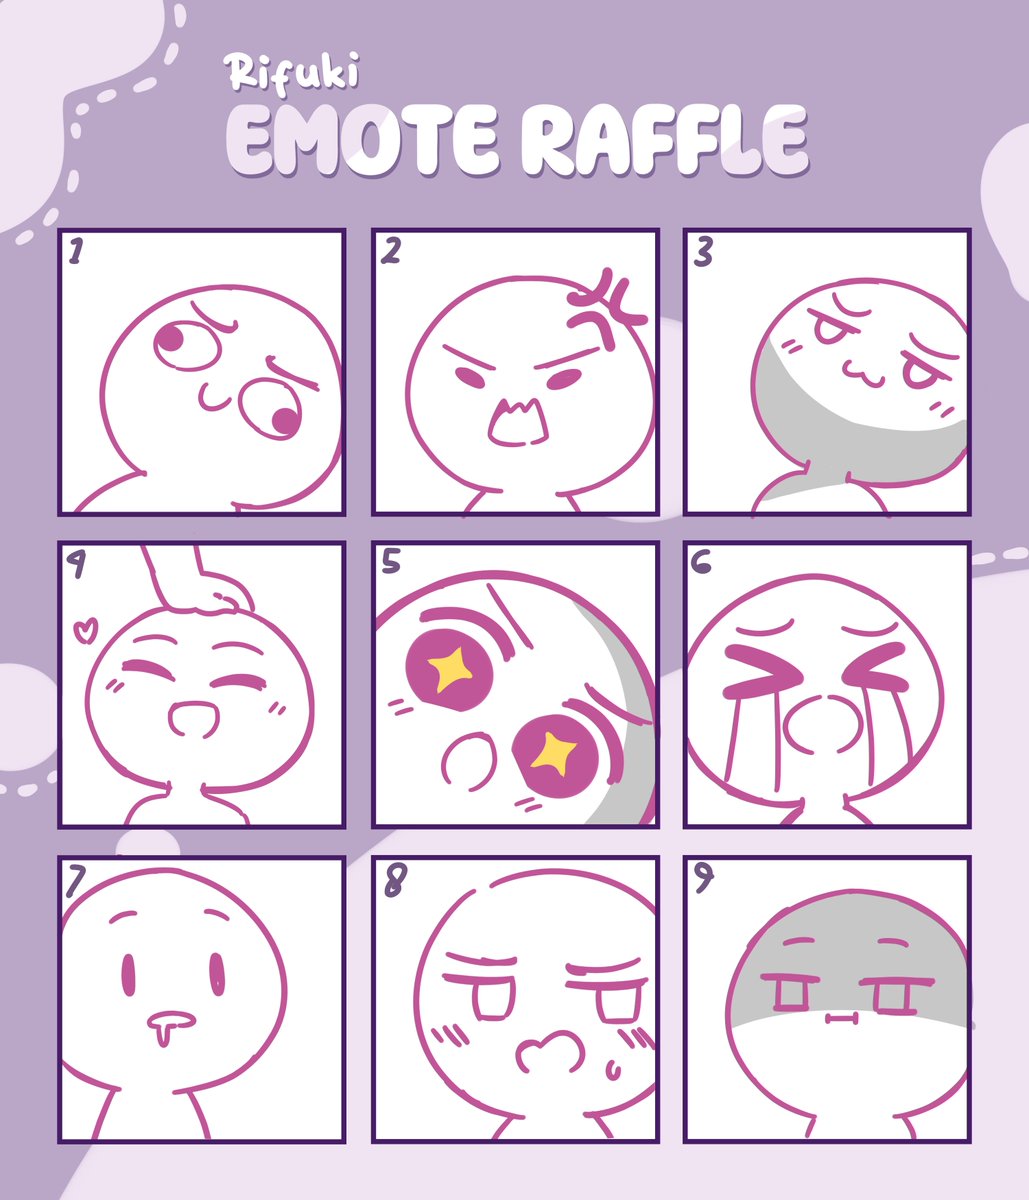 Emote raffle, bday special~ ✨✨

It's open for vtuber only this time

How to join :
▸Repost & Follow me to enter 
▸Drop your vtuber avatar in the reply
▸9 Winners get 1 random emote

~Ends in february 7th~ 